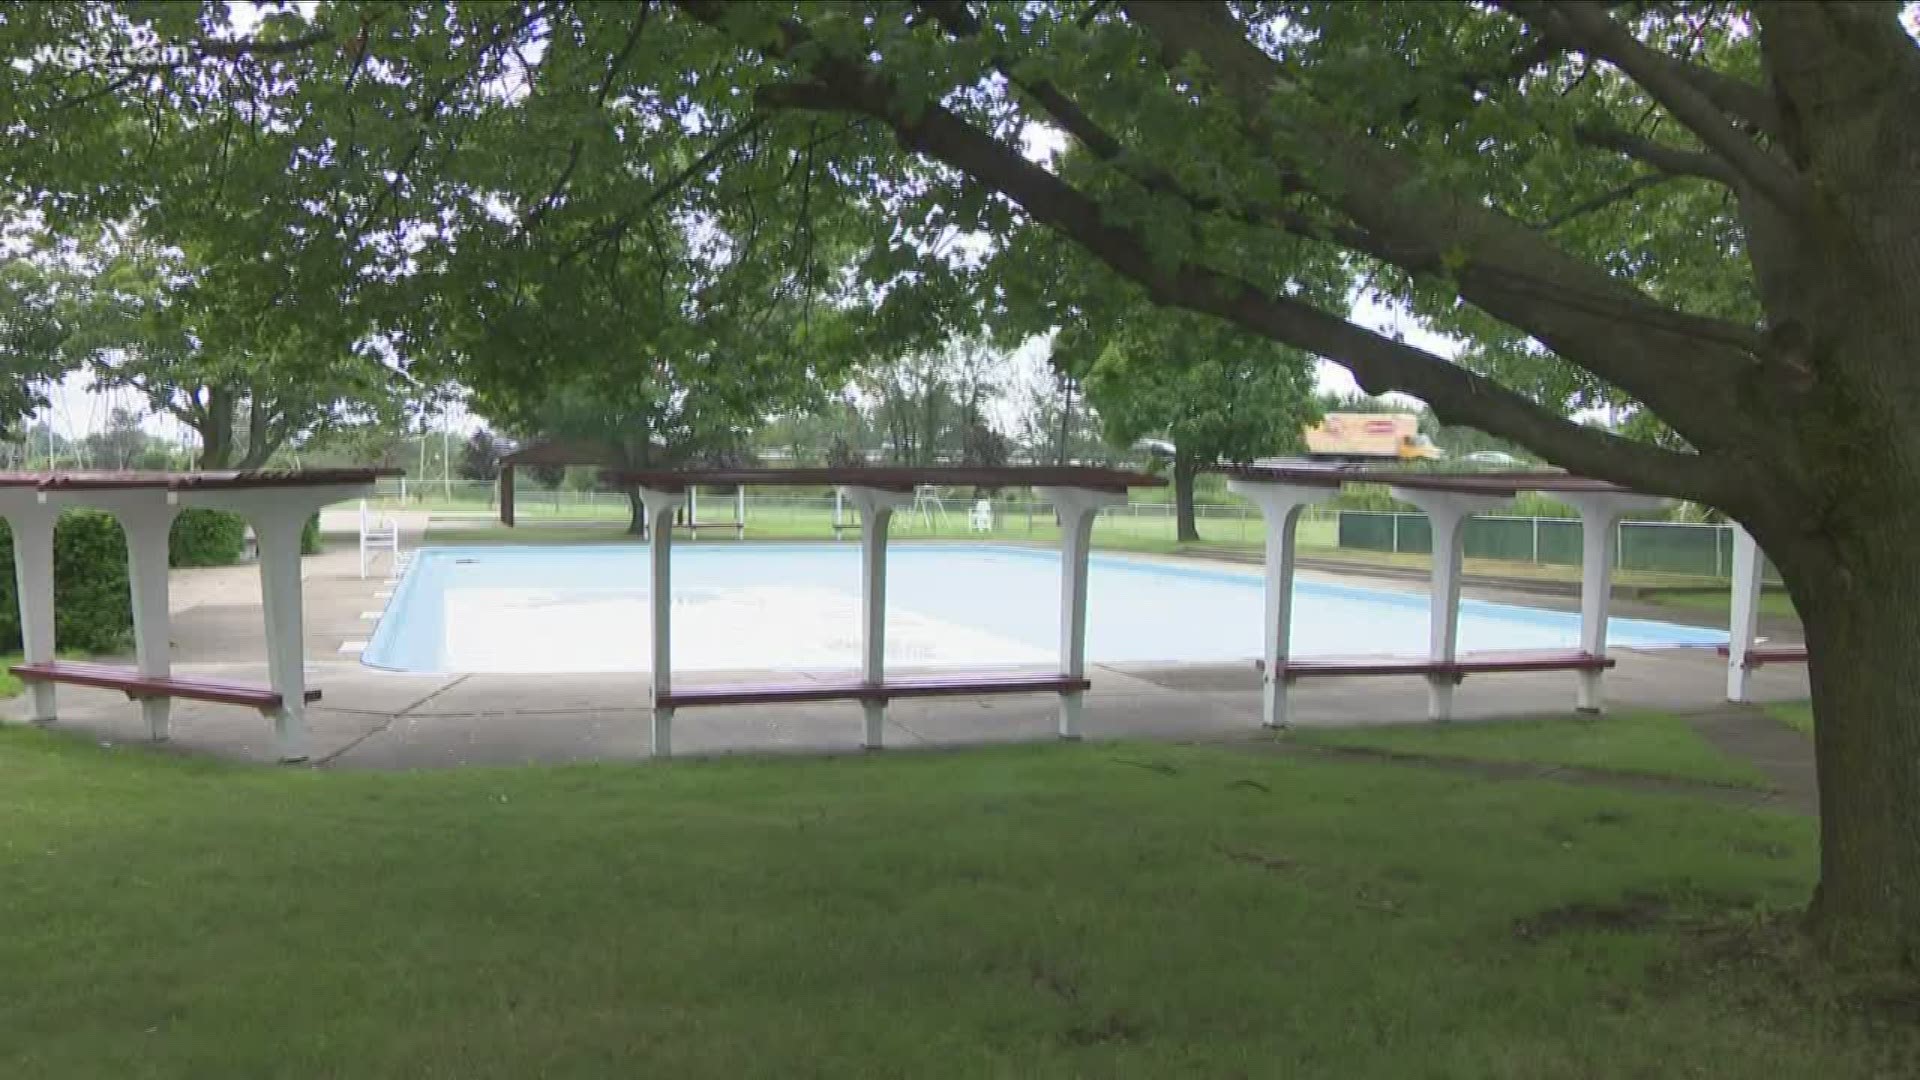 Brighton Pool would reportedly cost 800-thousand dollars to repair...